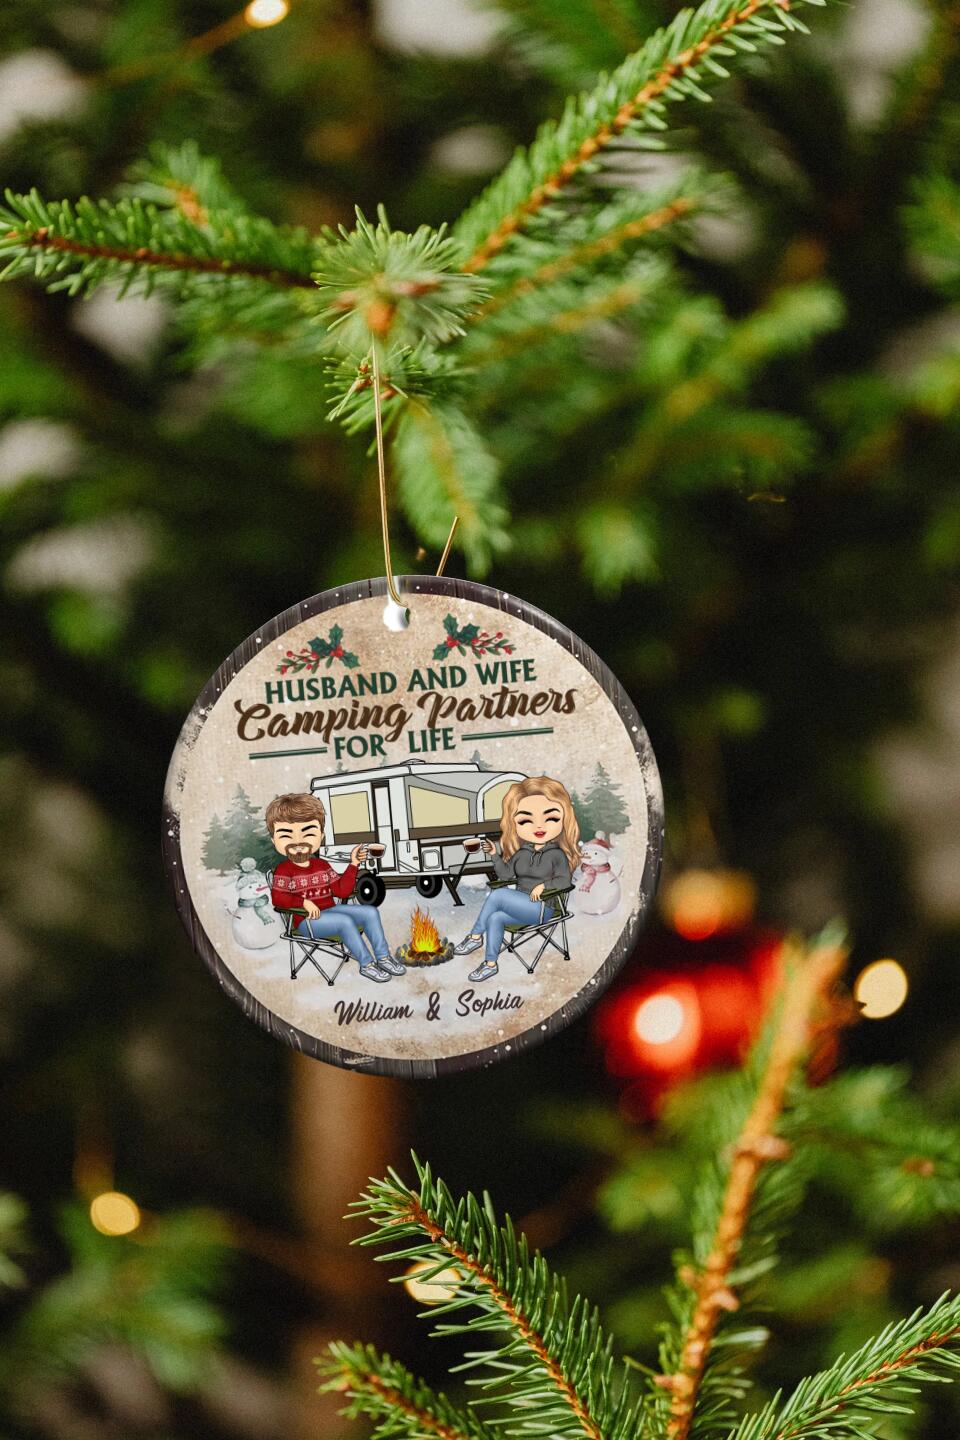 Husband And Wife Camping Partners For Life - Christmas Gift For Camping Couples - Personalized Custom Circle Ceramic Ornament [O-F23]